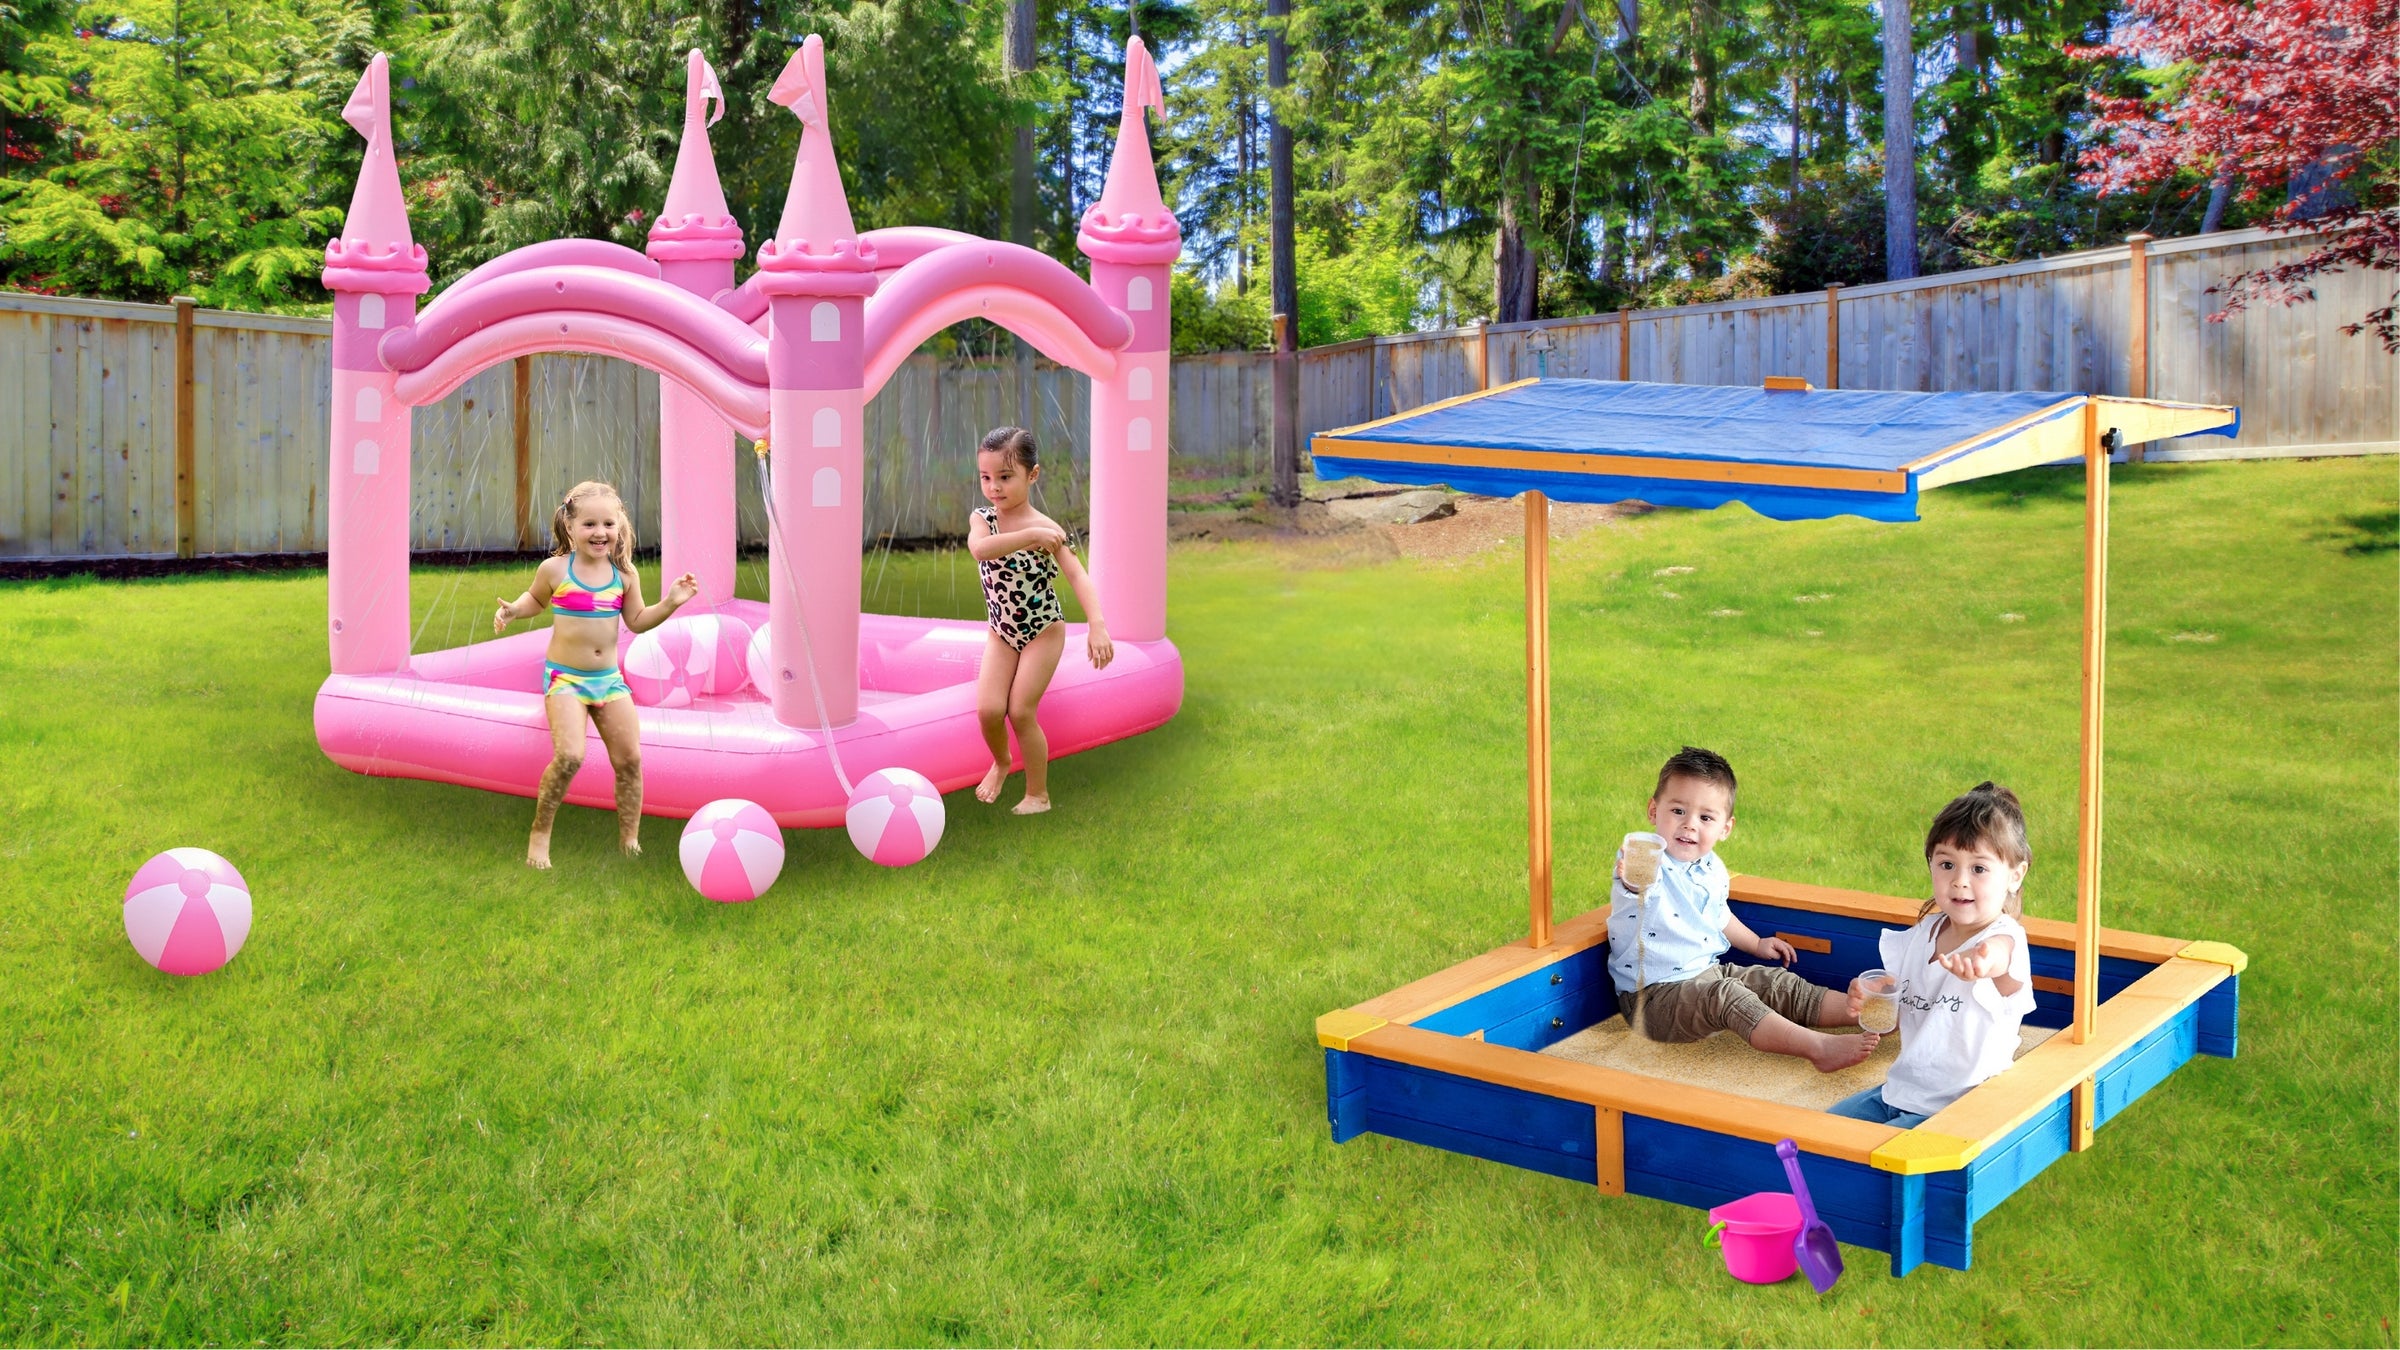 4 kids playing in a pink Inflatable kiddie pool with beach balls next to a kid's sandbox filled with toys in a backyard.